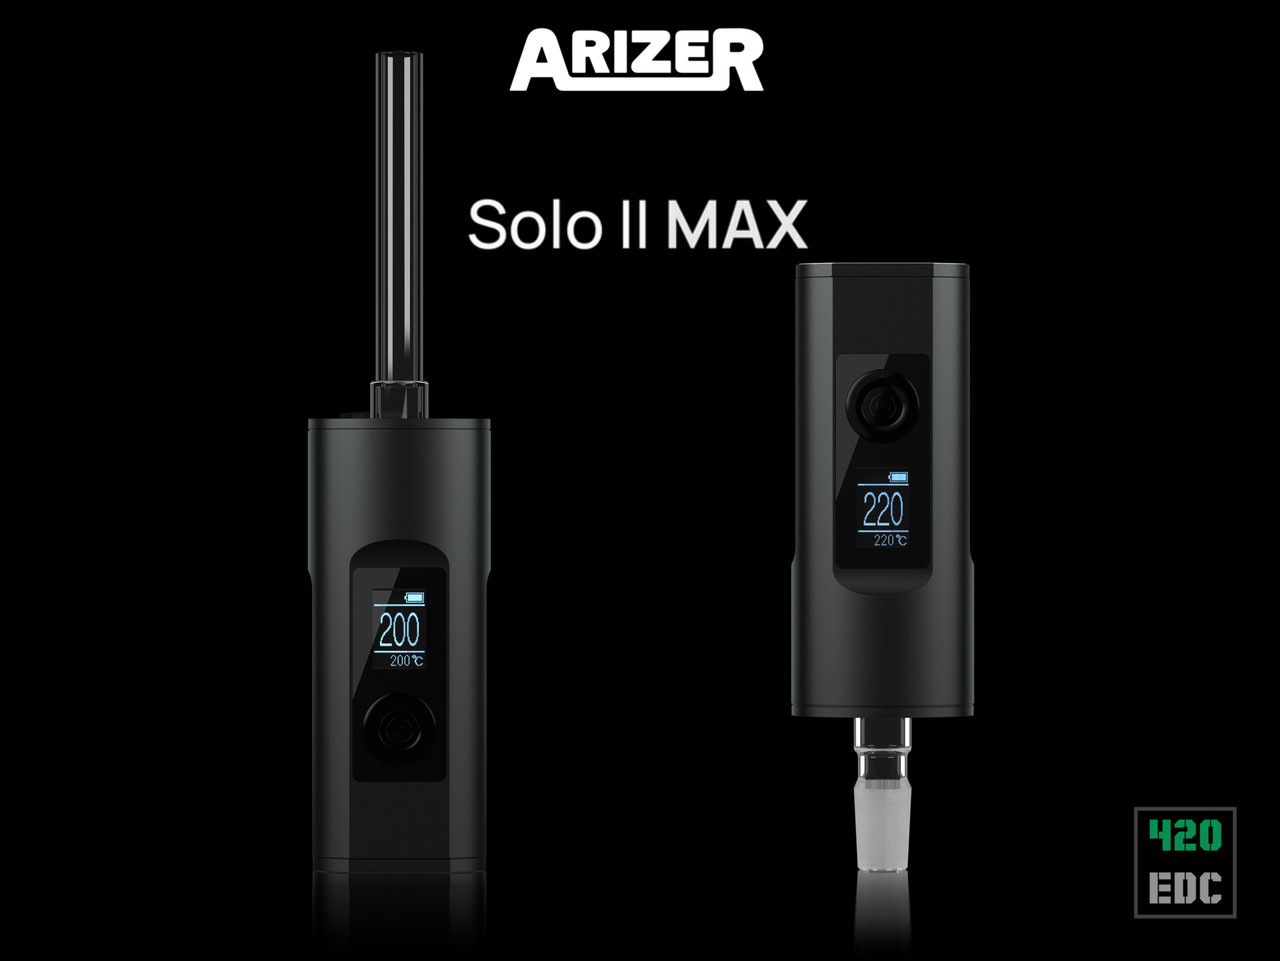 https://cdn11.bigcommerce.com/s-ul77vcnblr/images/stencil/1280x1280/products/428/3131/Arizer_Solo_II_MAX_Product_Cover__85050.1705345512.jpg?c=2